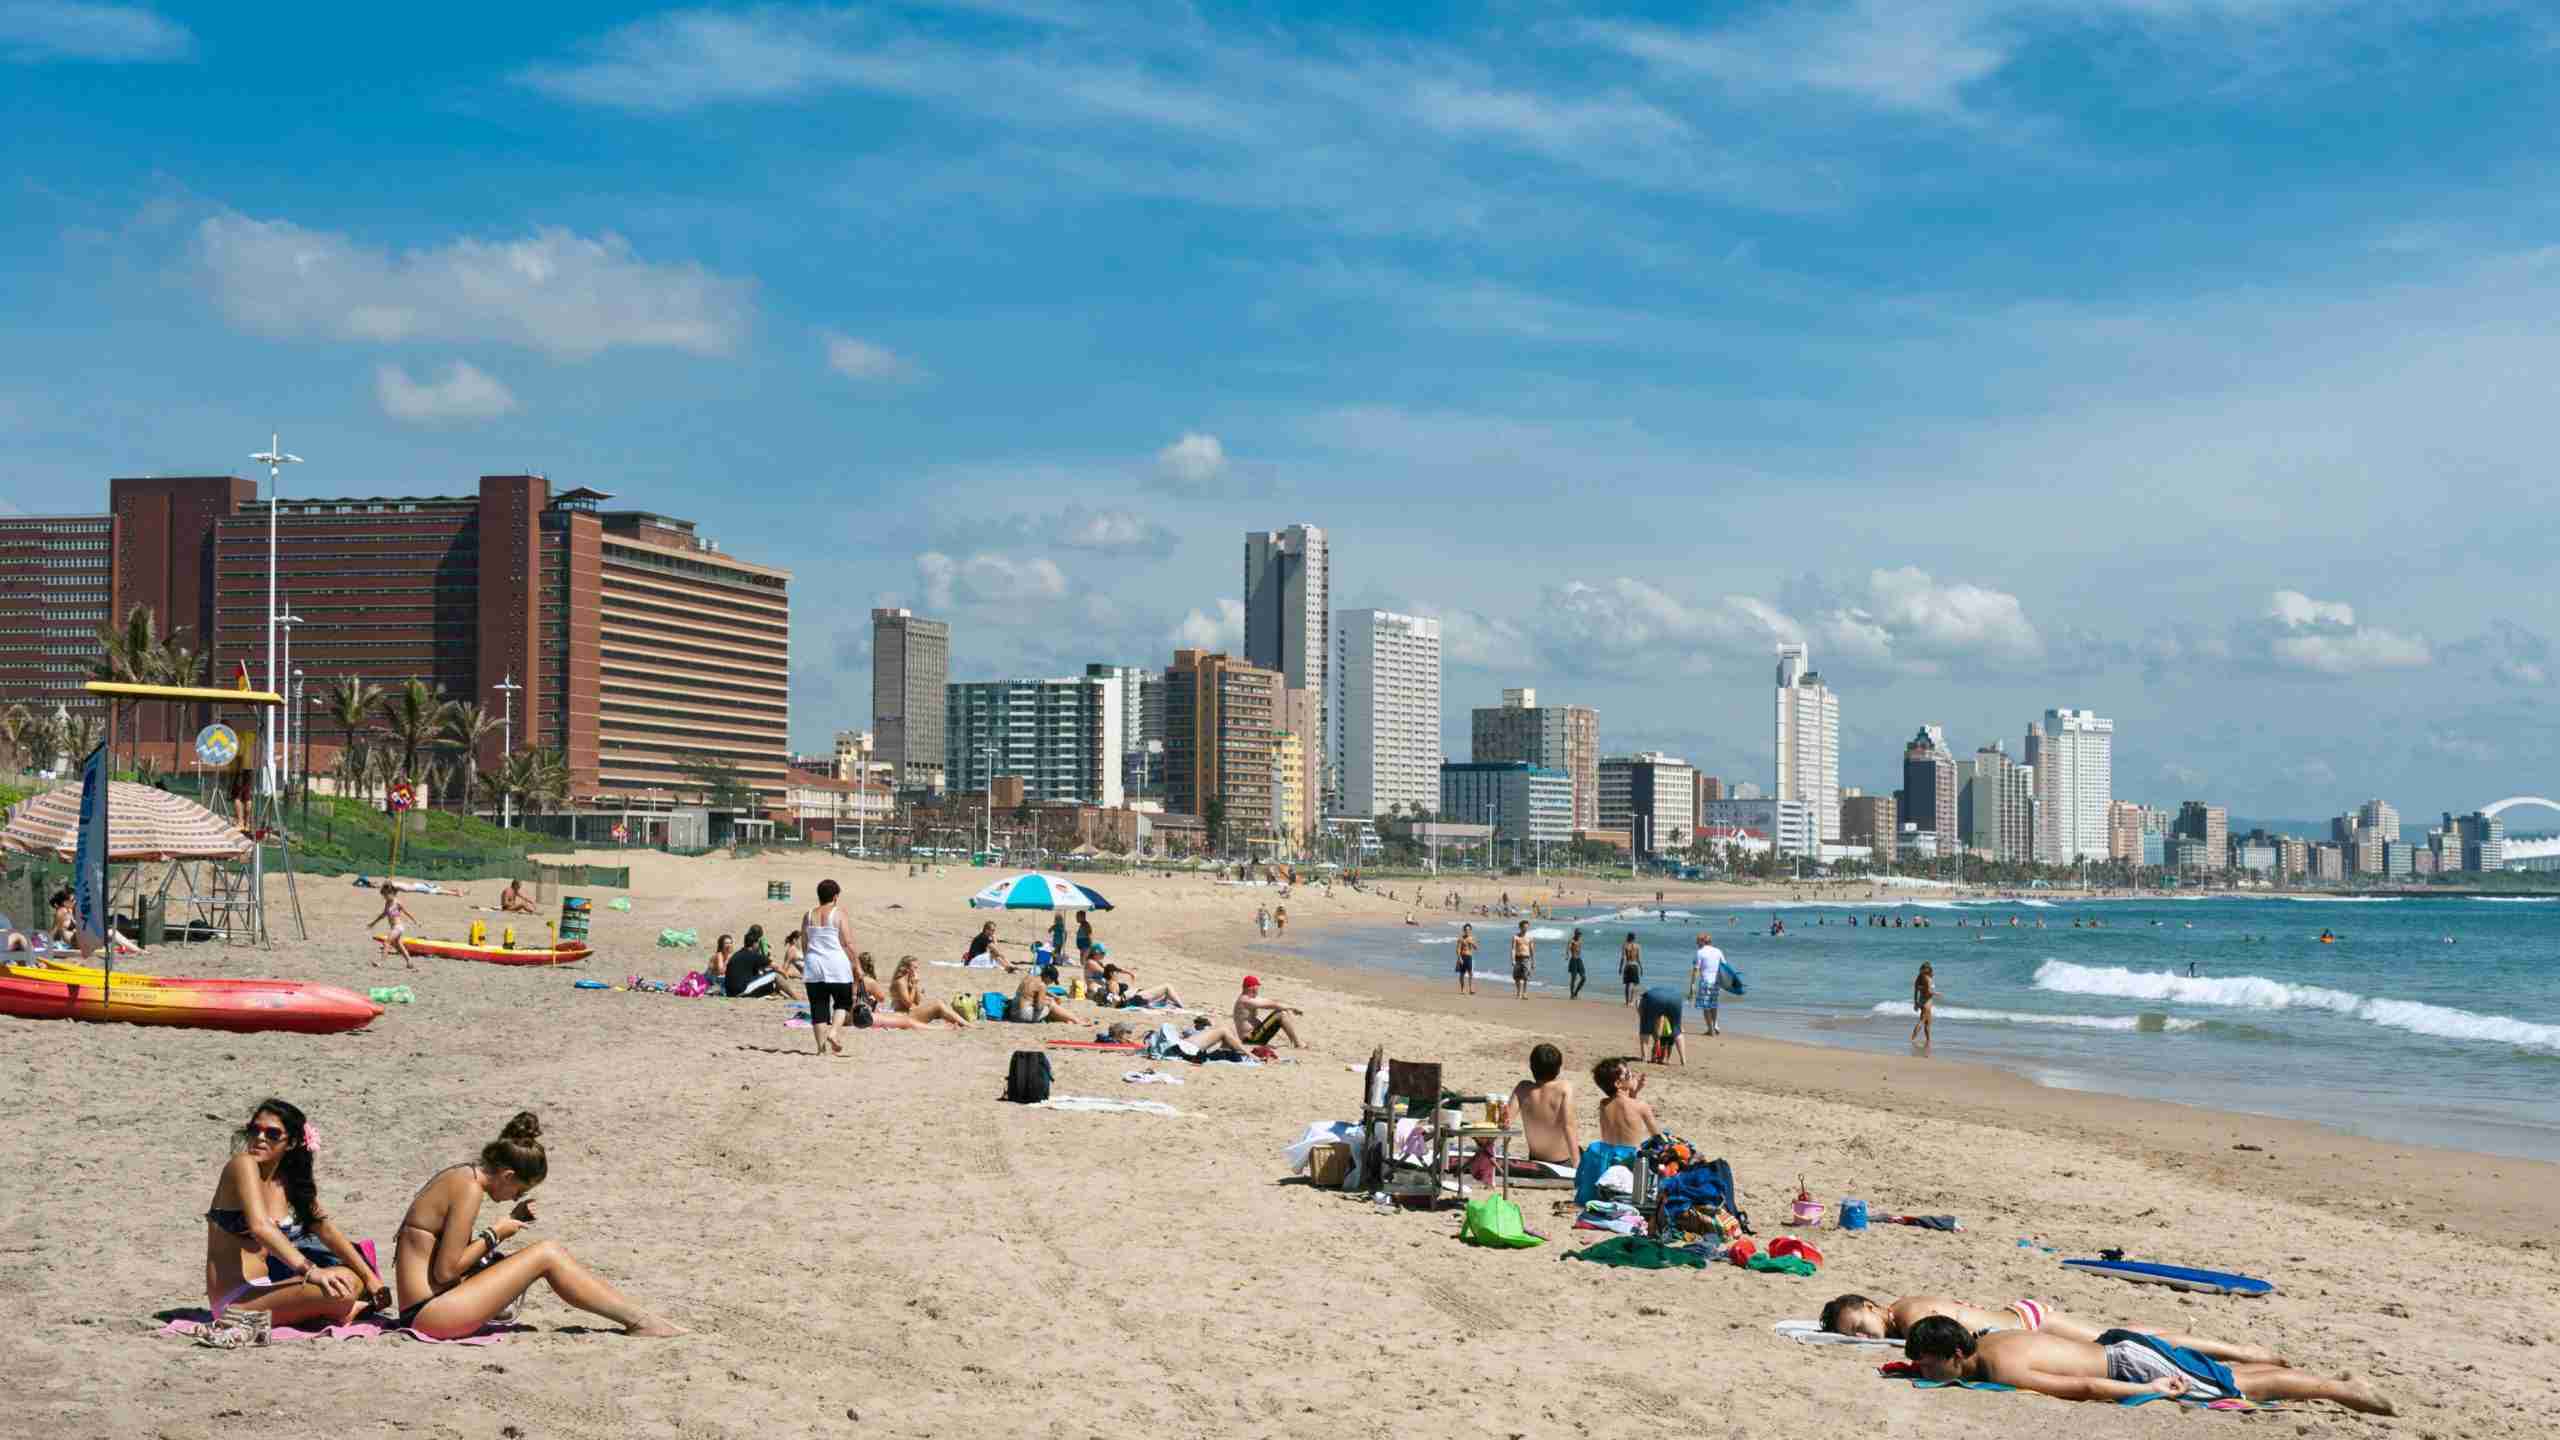 Durban waterfront, South Africa